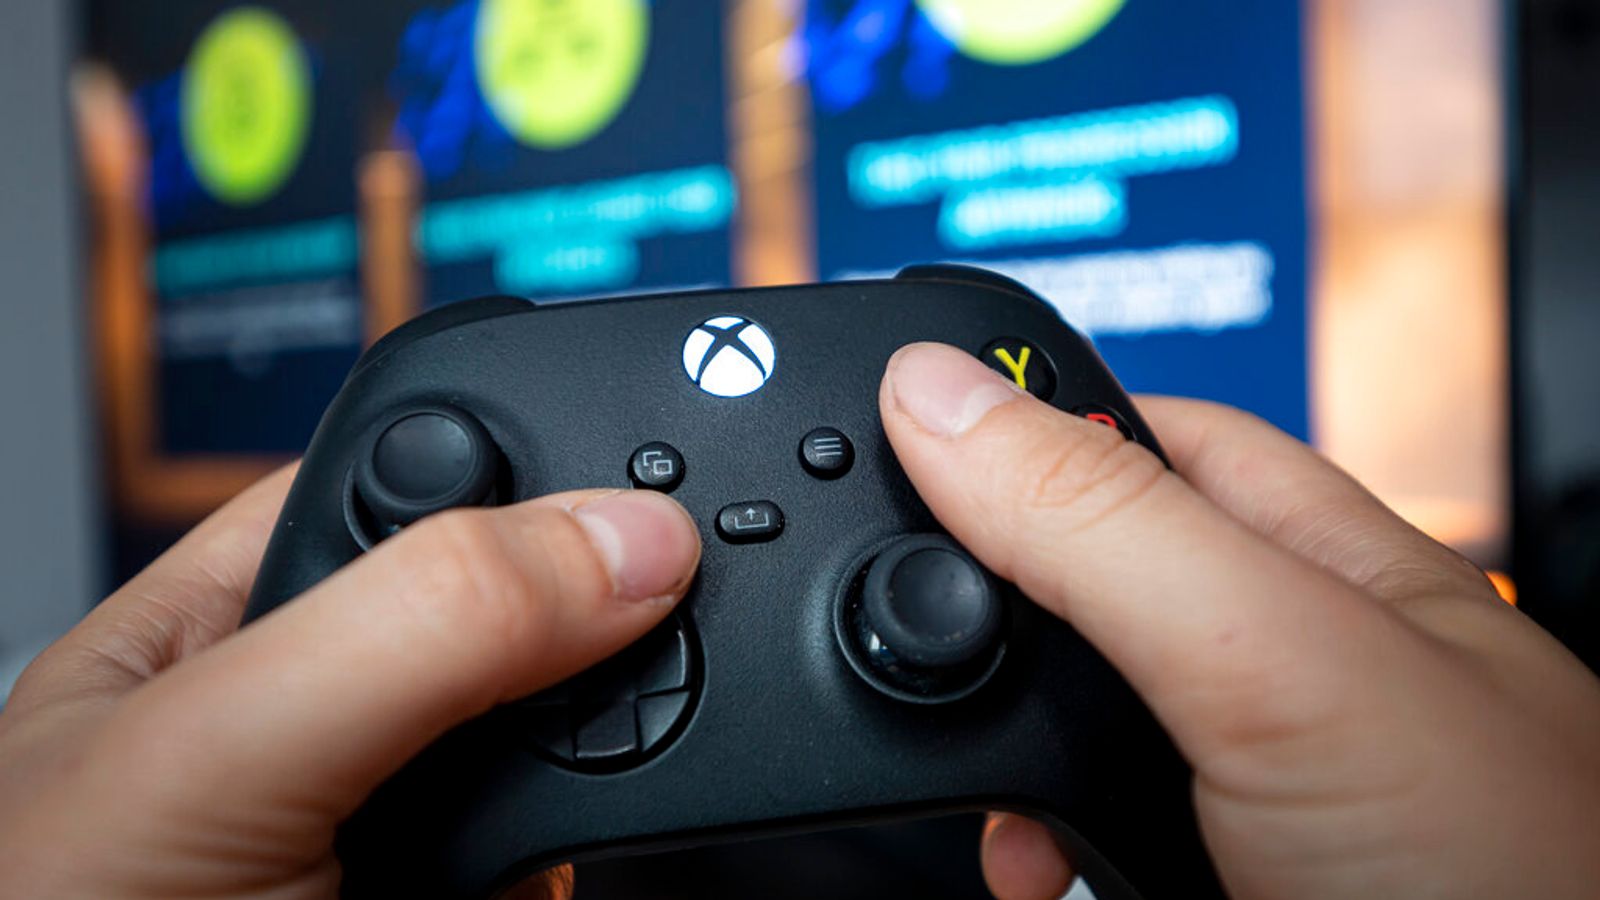 NHS treating hundreds of children as young as 13 for gaming disorders | Science & Tech News